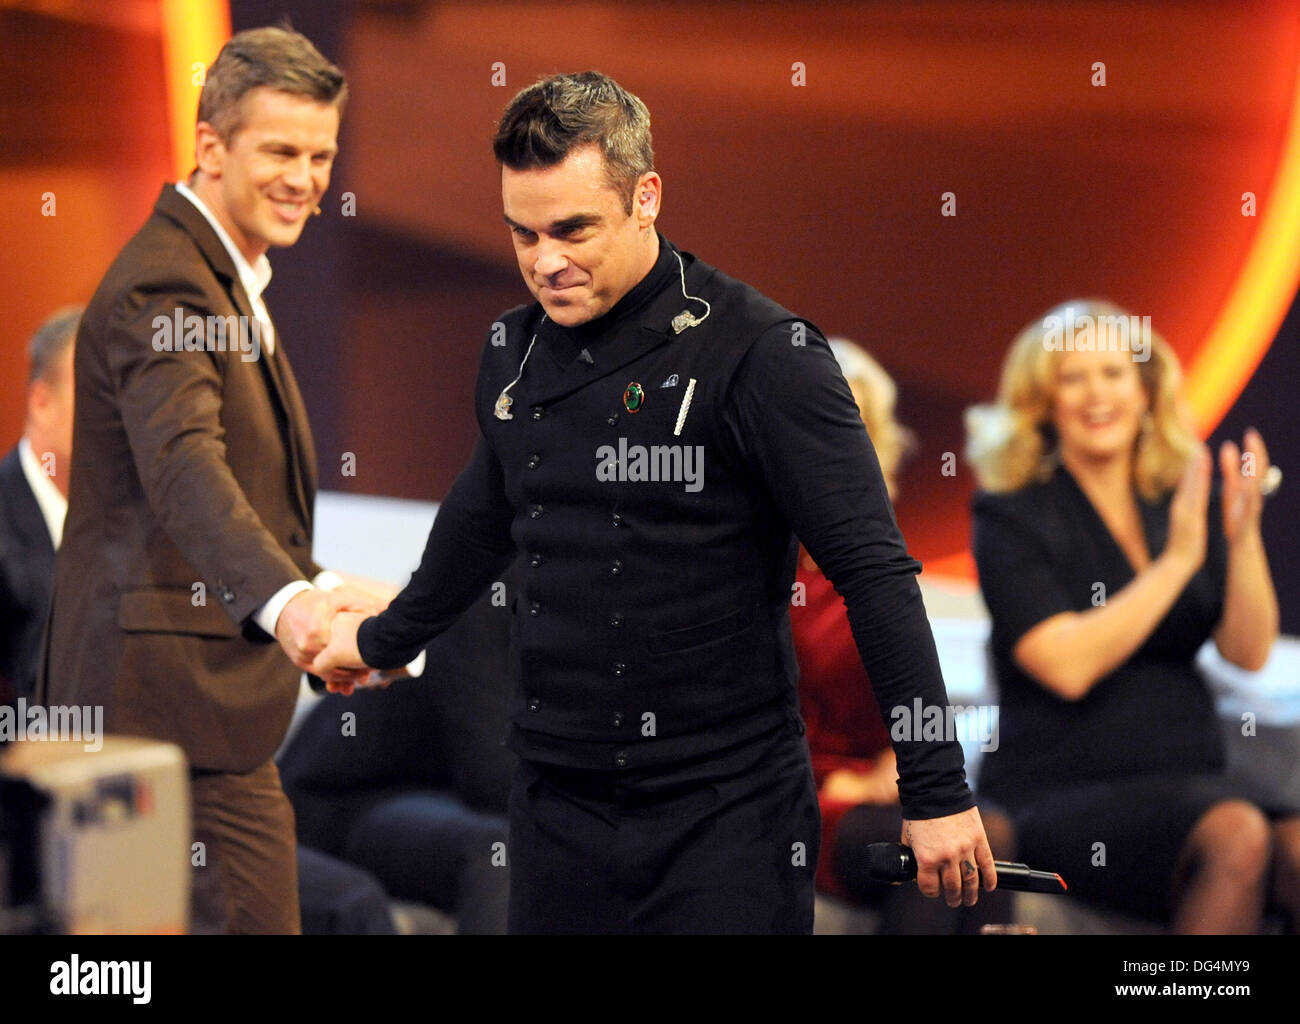 German actress Barbara Schoeneberger (L) and German television host Markus Lanz (R) talk to British singer Robbie Williams (C) during the German television game show 'Wetten Das.? (Wanna bet.?), hosted by Markus Lanz (L) at the OVB-Arena in Bremen, Germany 3 November 2012. Photo: Ingo Wagner Stock Photo